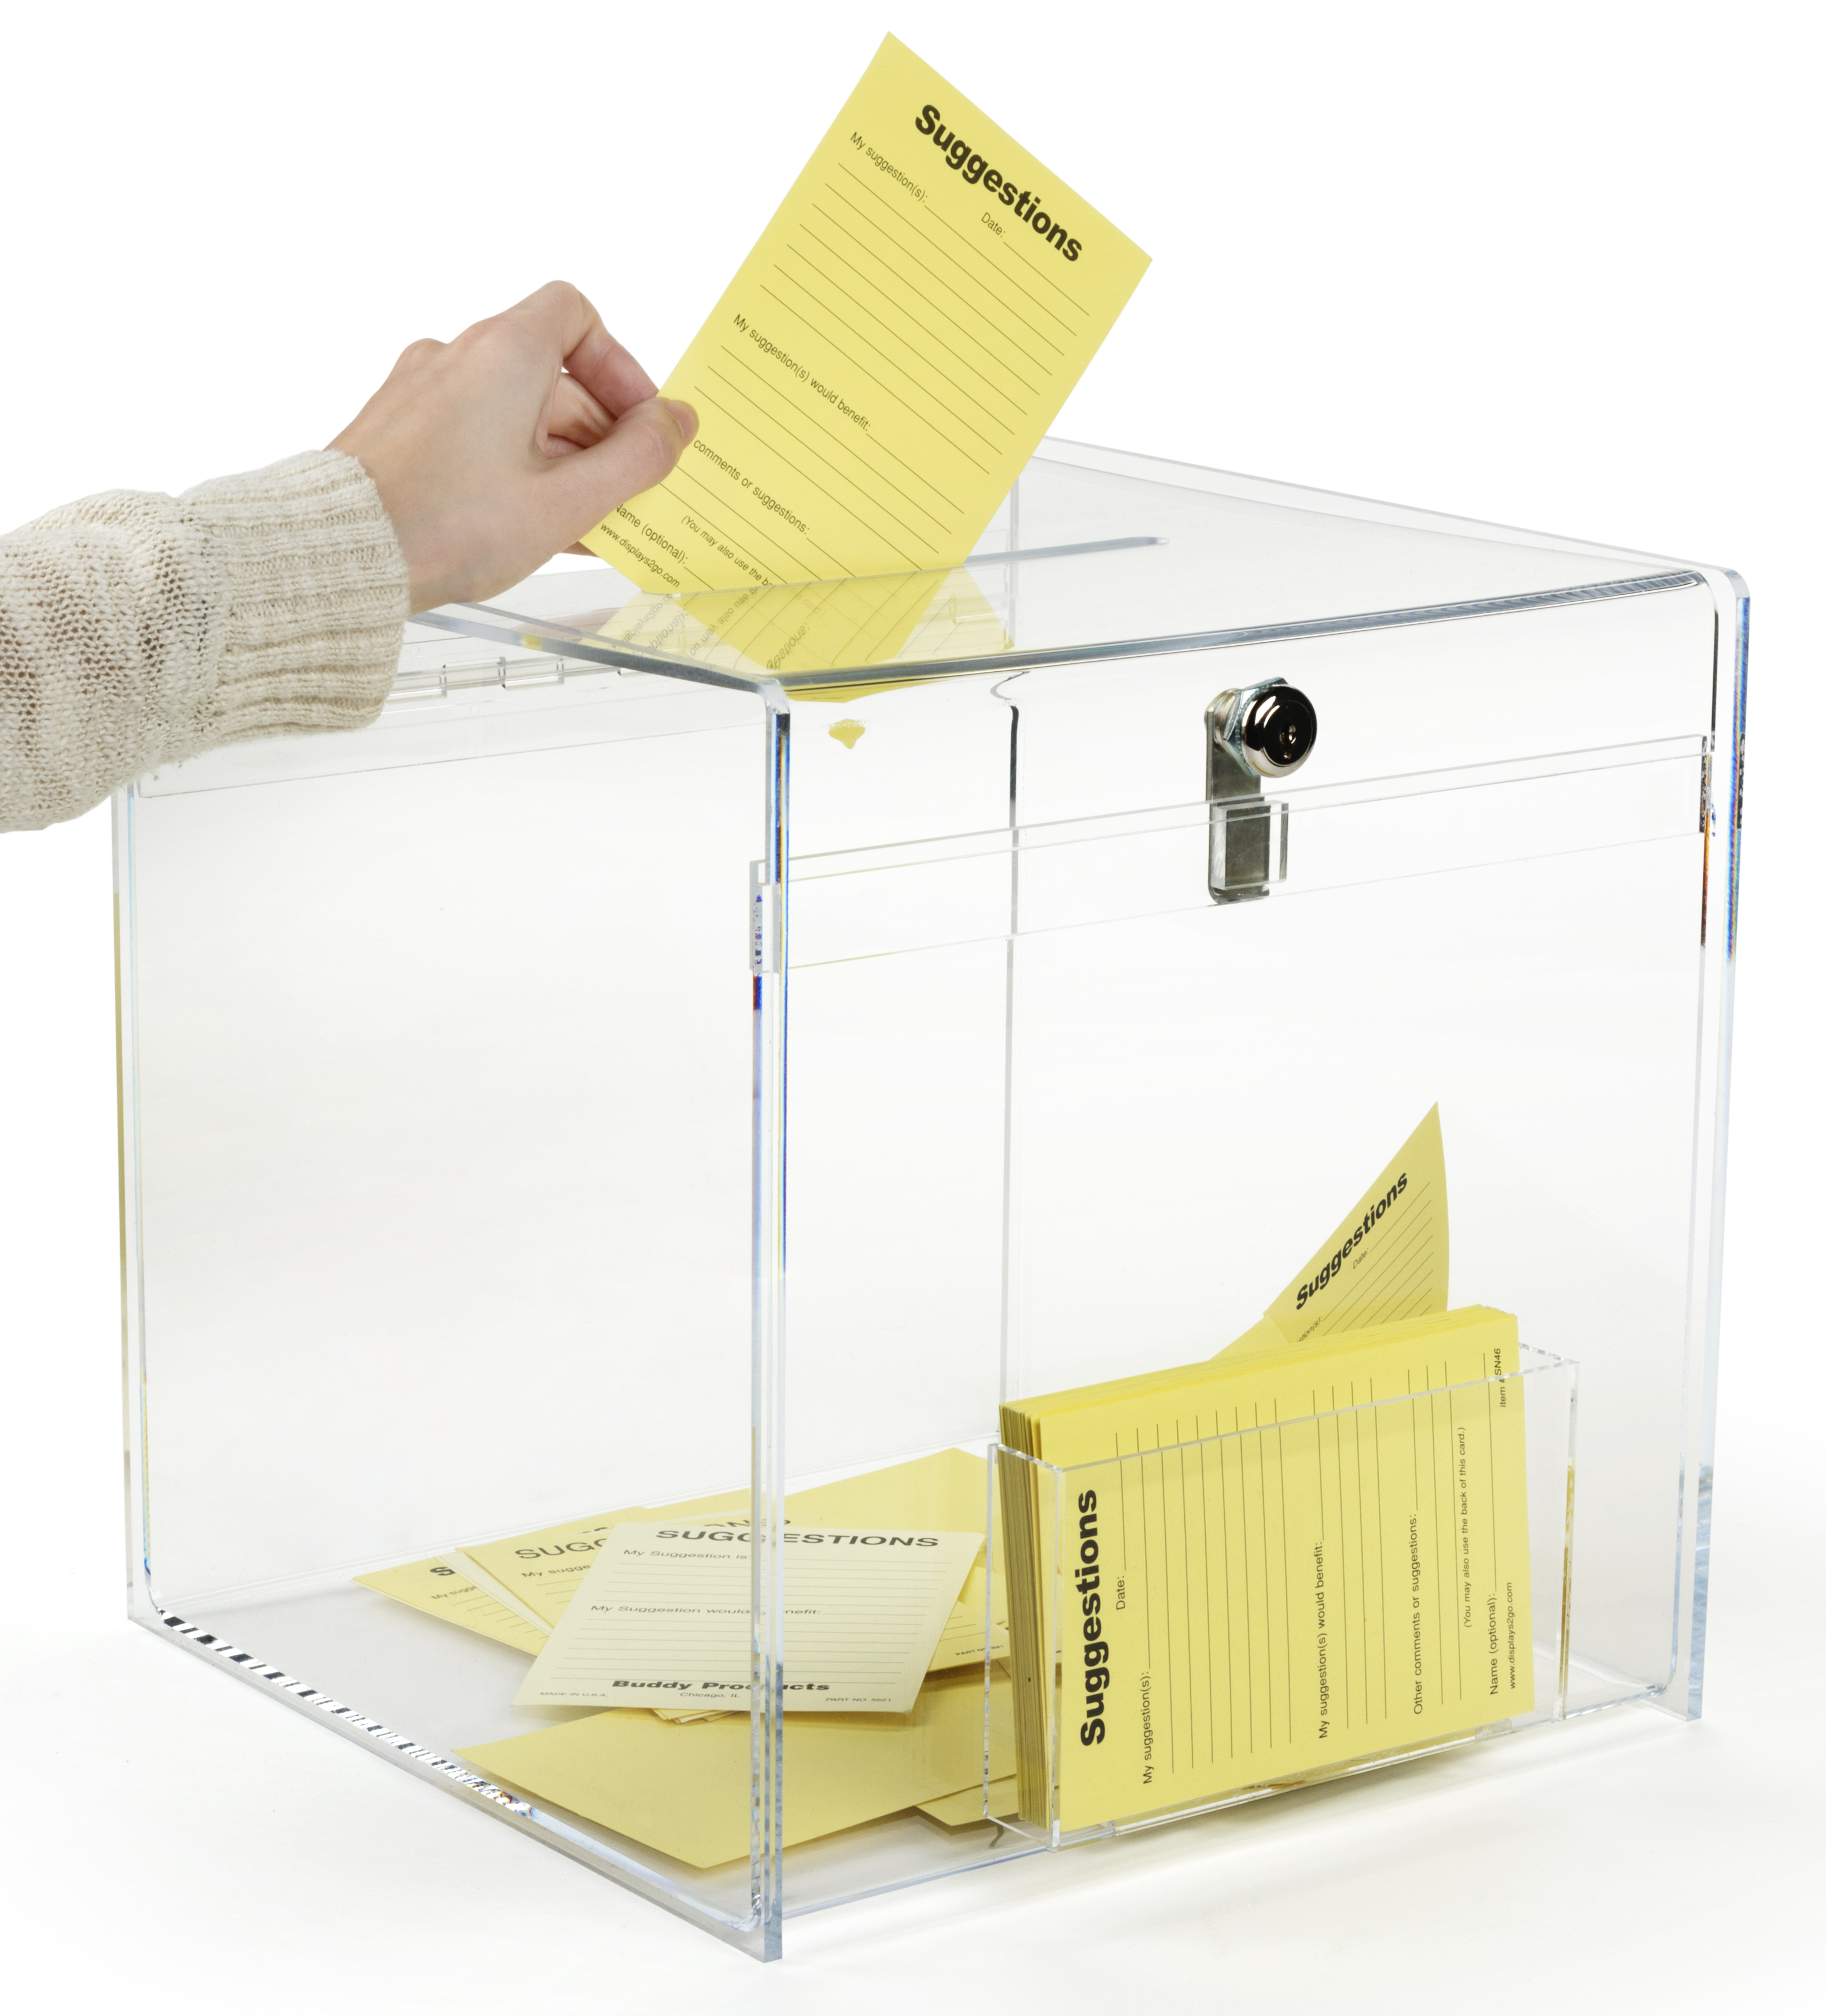 Marketing Holders 12 Inch Locking Ballot Box Clear Acrylic Square Cube Top  Locking See Through Countertop Contests Entry or Collection Bin